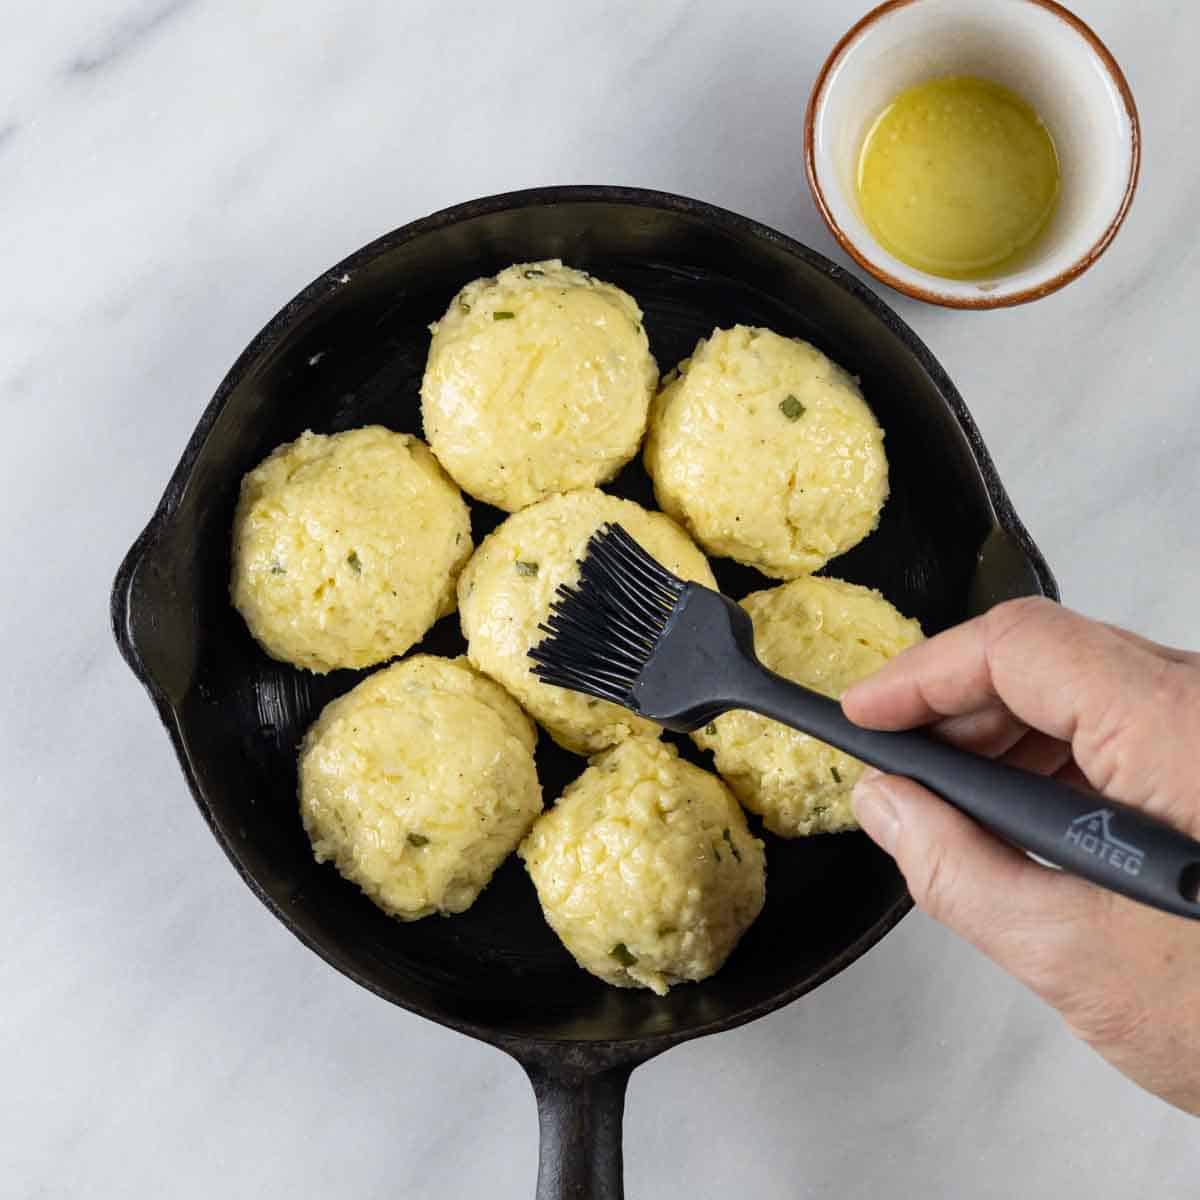 Balls of dough in a cast iron skillet being brushed with melted butter.